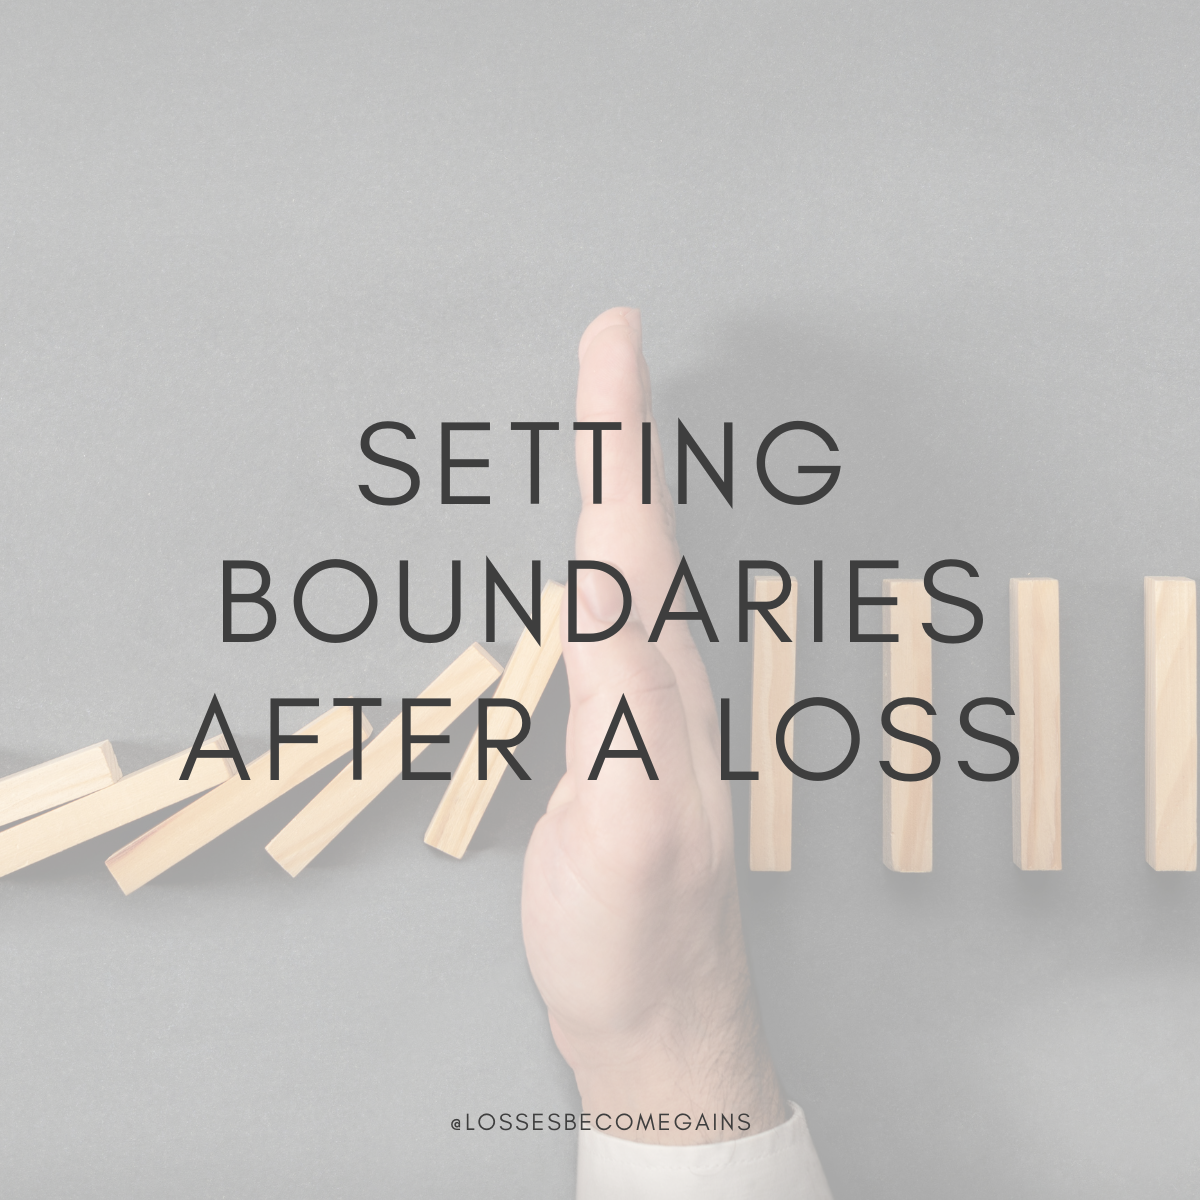 Setting boundaries after a loss by Losses Become Gains